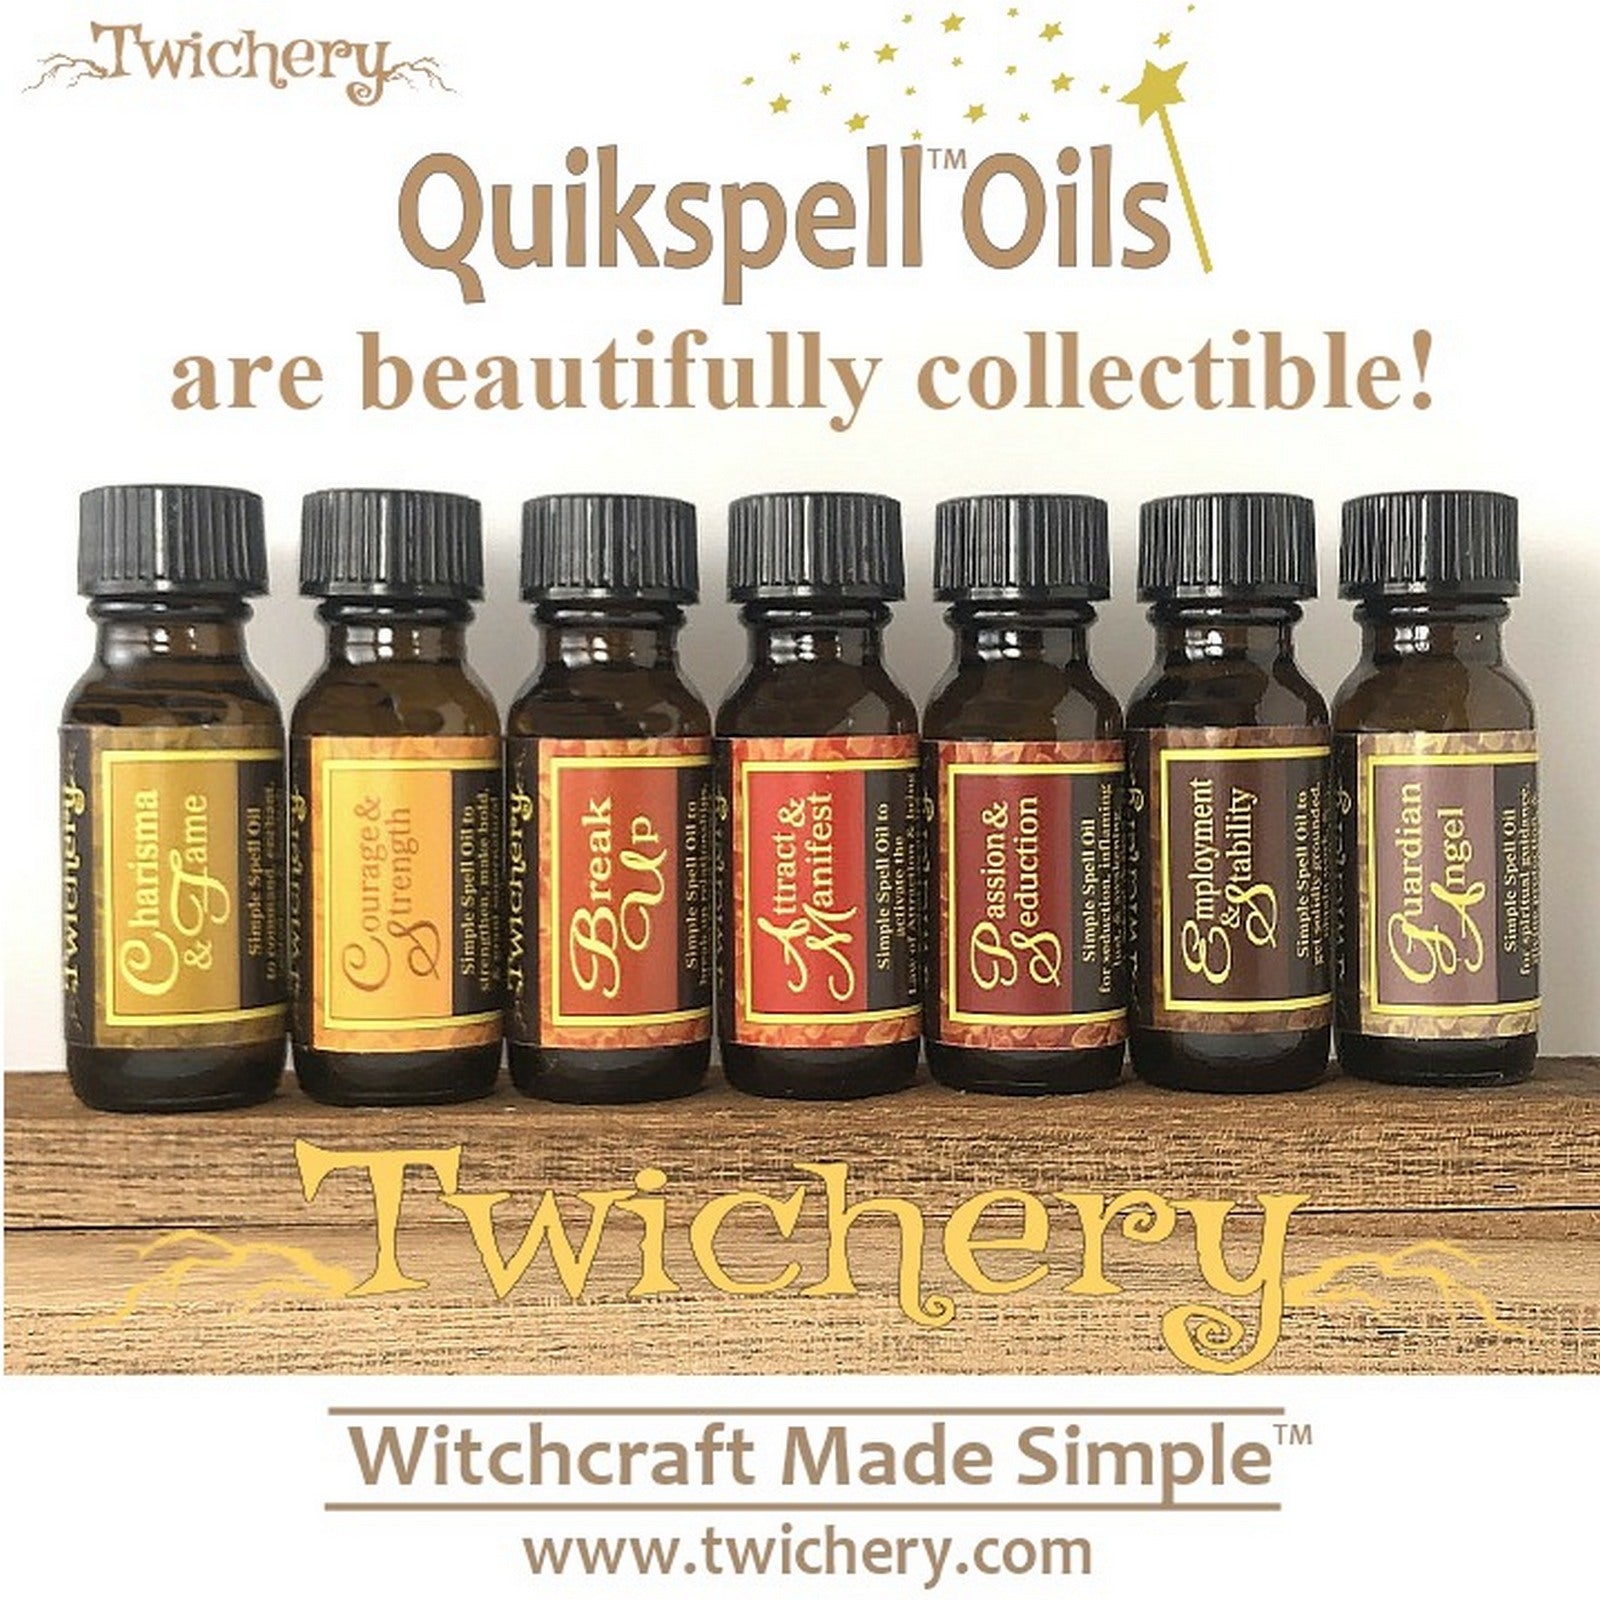 Twichery is Witchcraft Made Simple and Quick! Our Come to Me Quikspell Oil is for tender love and romance. Terrific for matchmaking! Hoodoo, Voodoo, Wicca, Pagan, Witchcraft Made Simple!